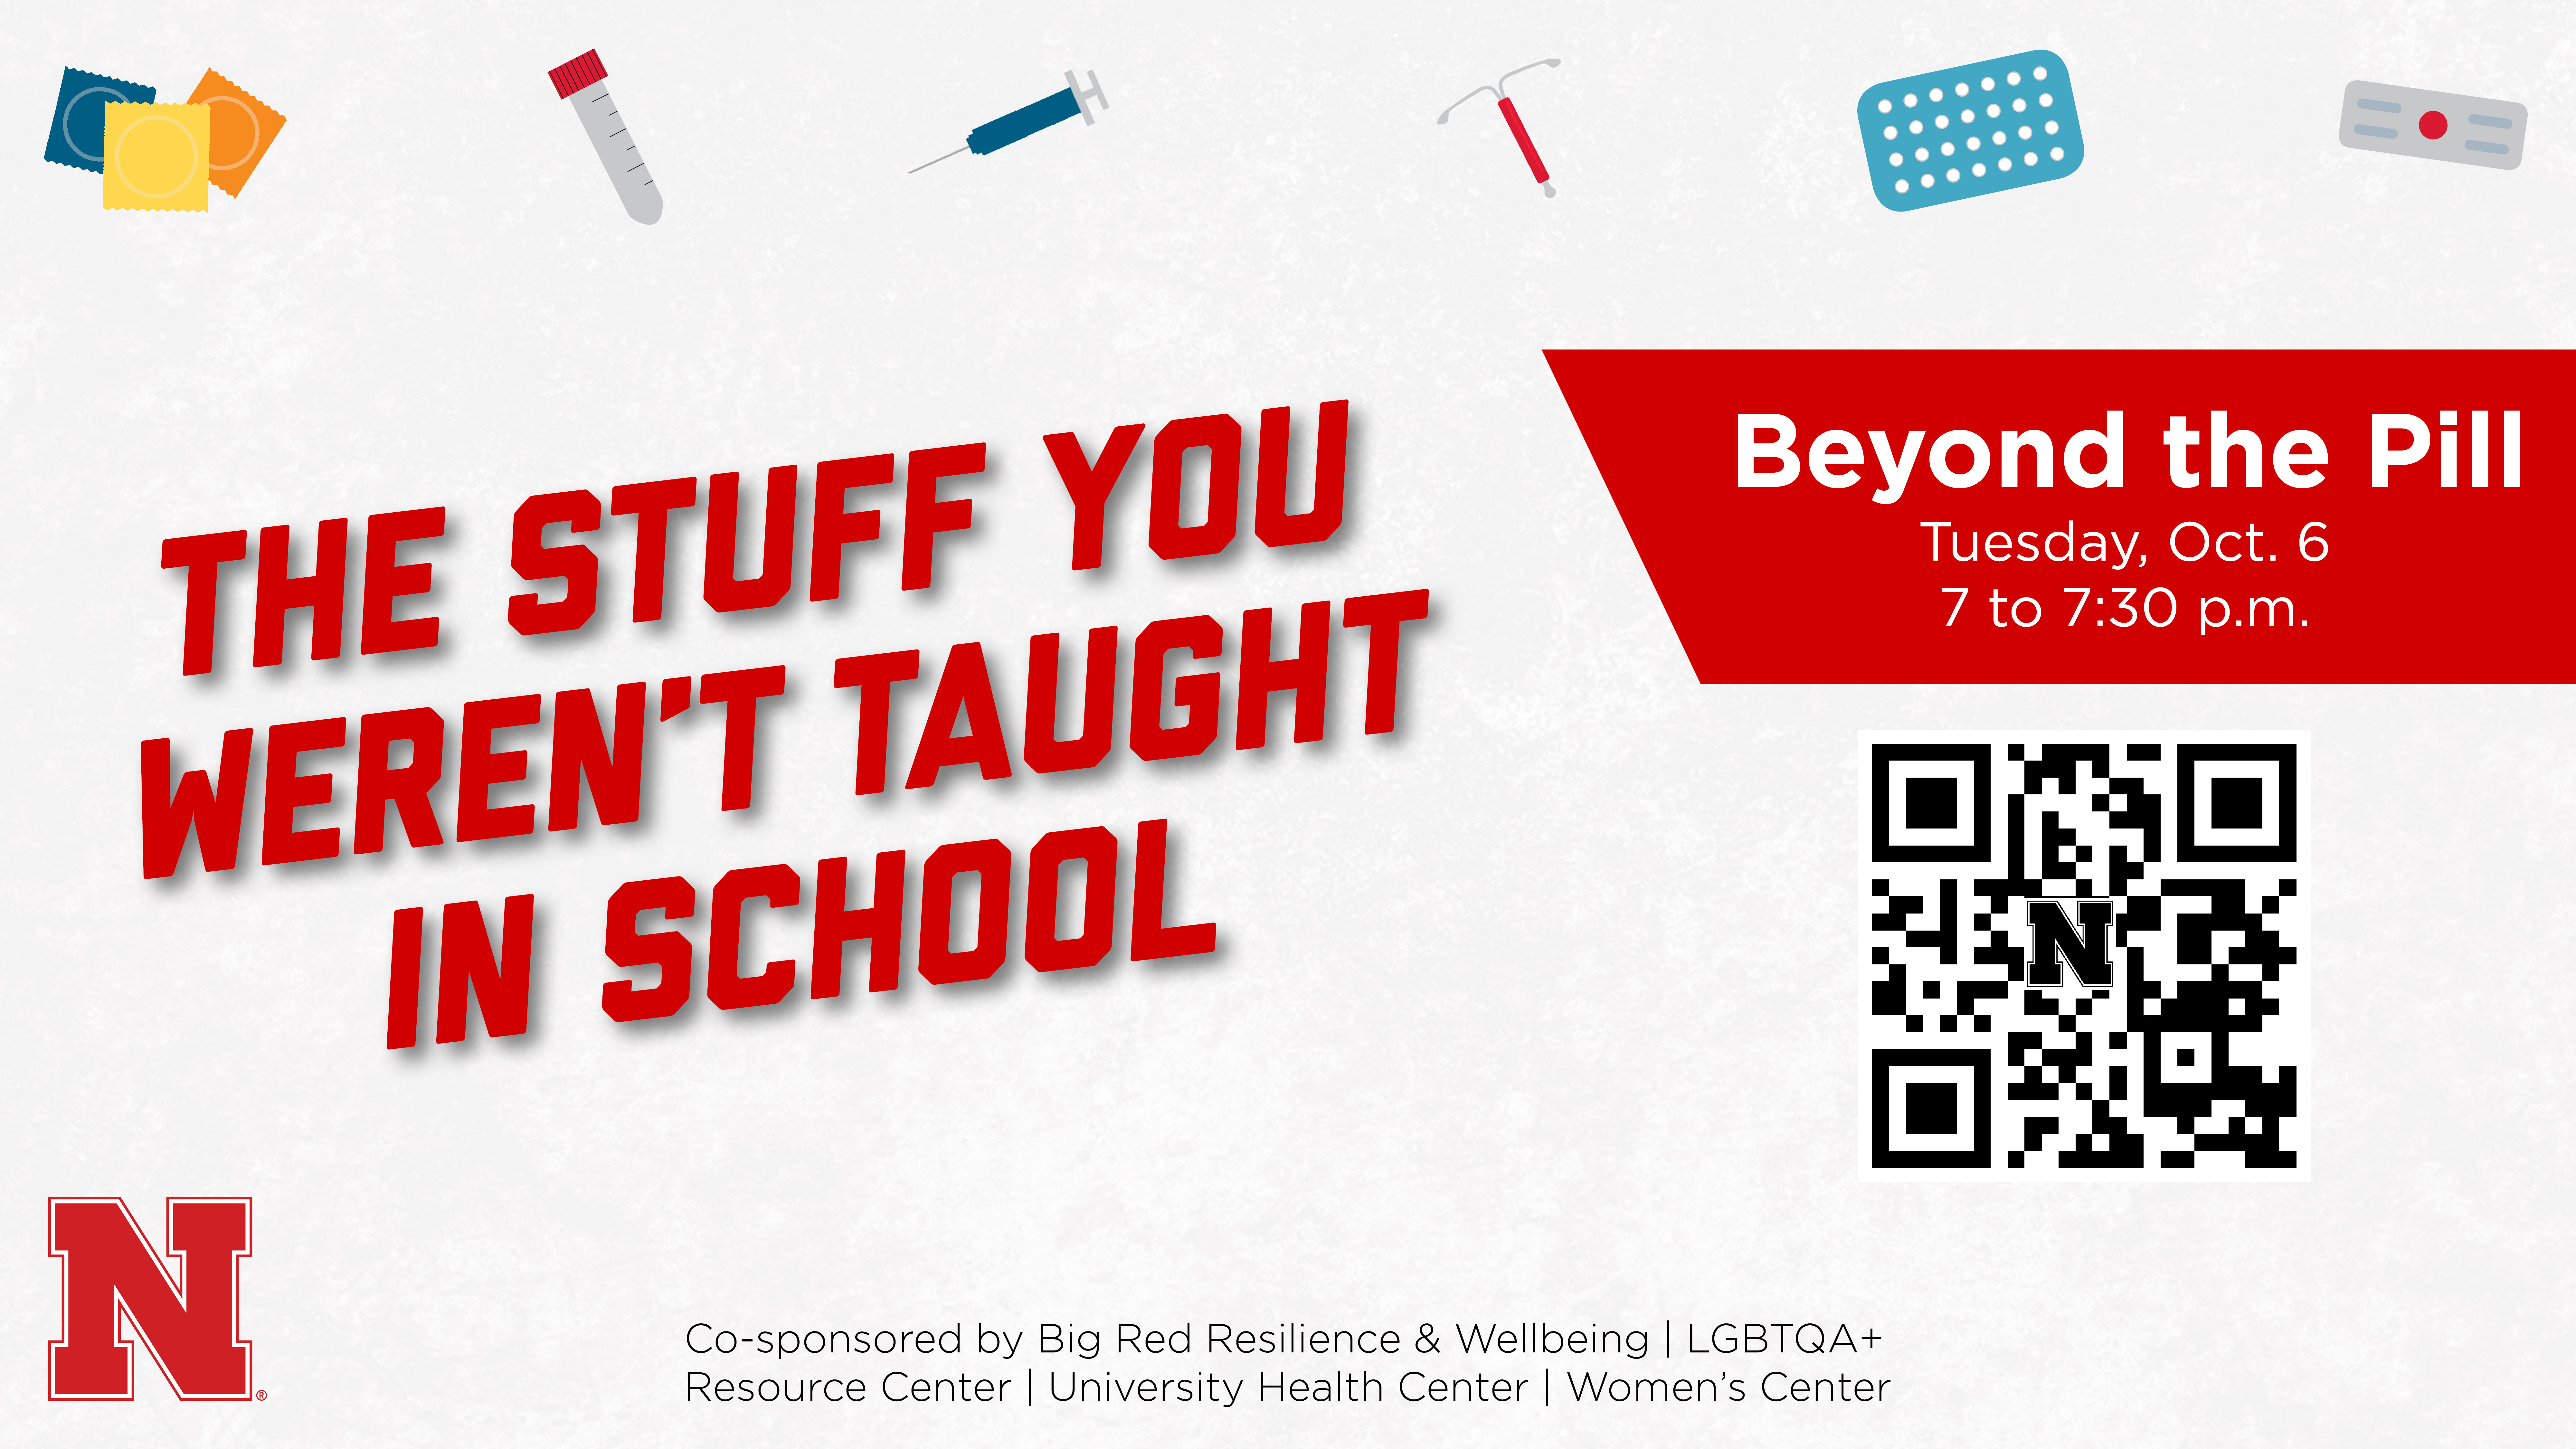 The Stuff You Weren't Taught in School is a sexual health webinar series sponsored by the University Health Center, Women's Center, LGBTQA+ Center and Big Red Resilience & Well-being.